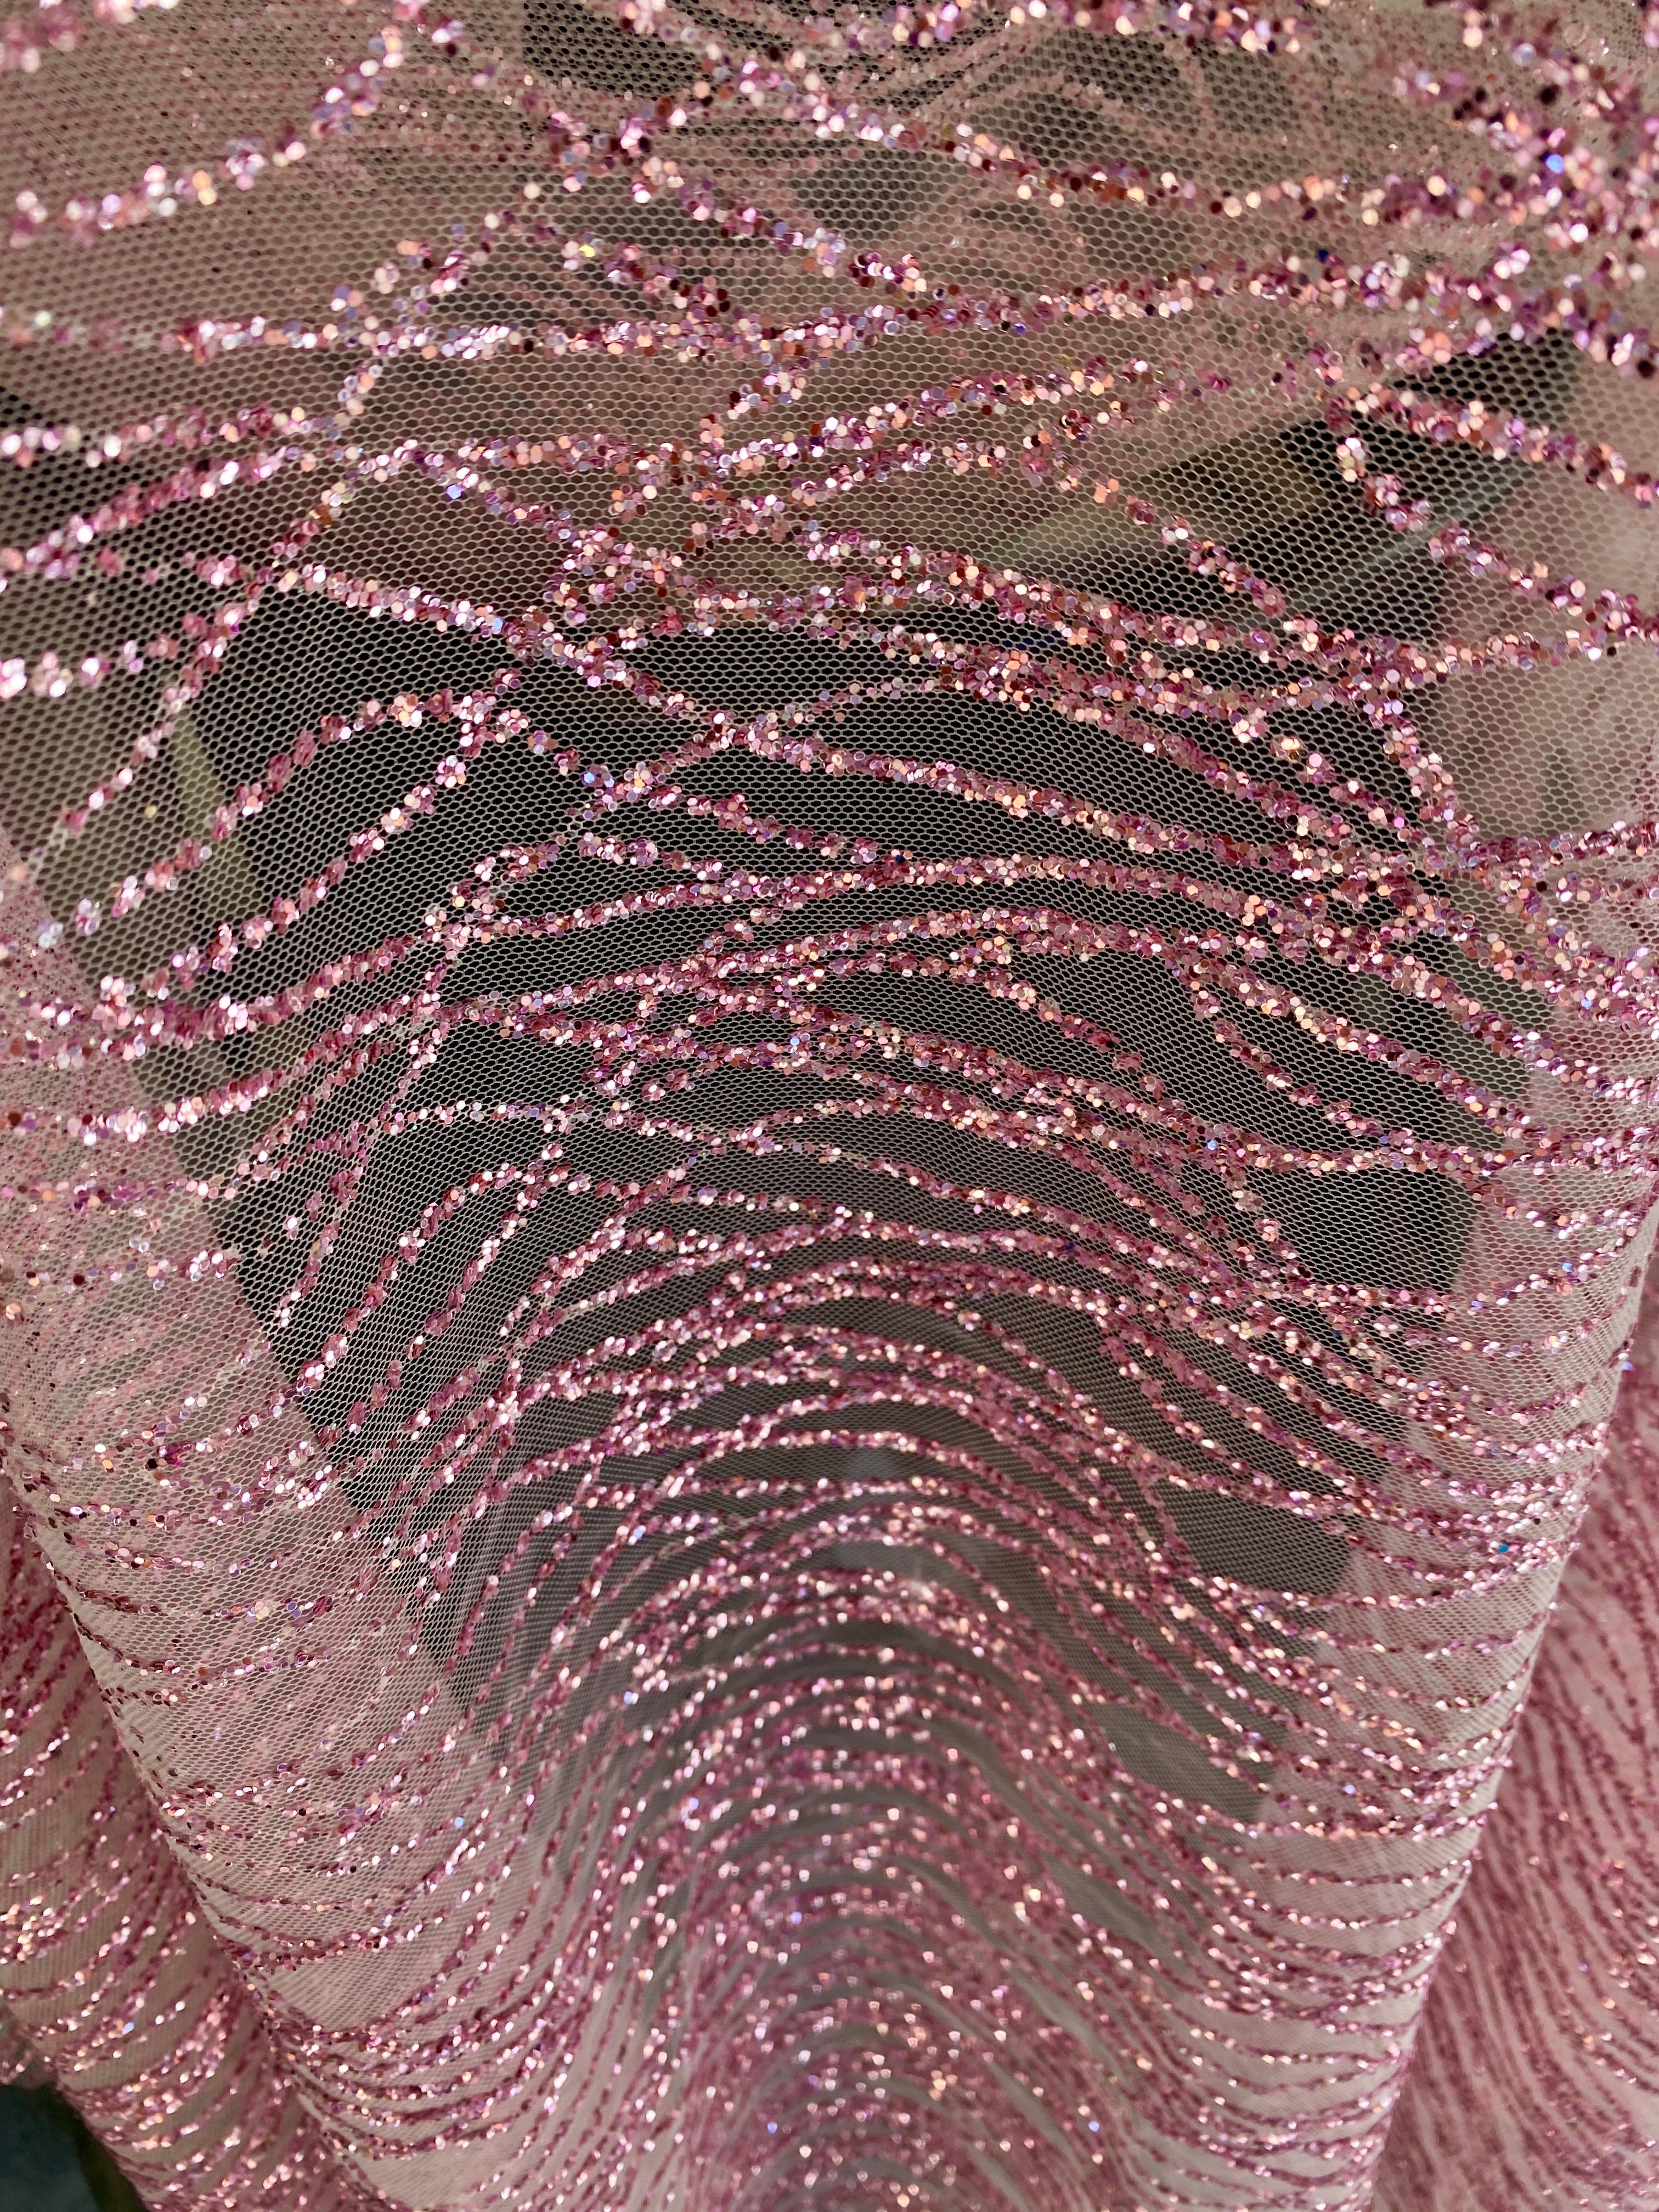 pink glitter lace, pink glitter lace for woman, rose pink lace, pink lace for bride, pink lace for part wear, lace designs, cheap lace, discounted lace, sale on lace, lace in low price, buy lace online, lace non stretch, shinny pink lace